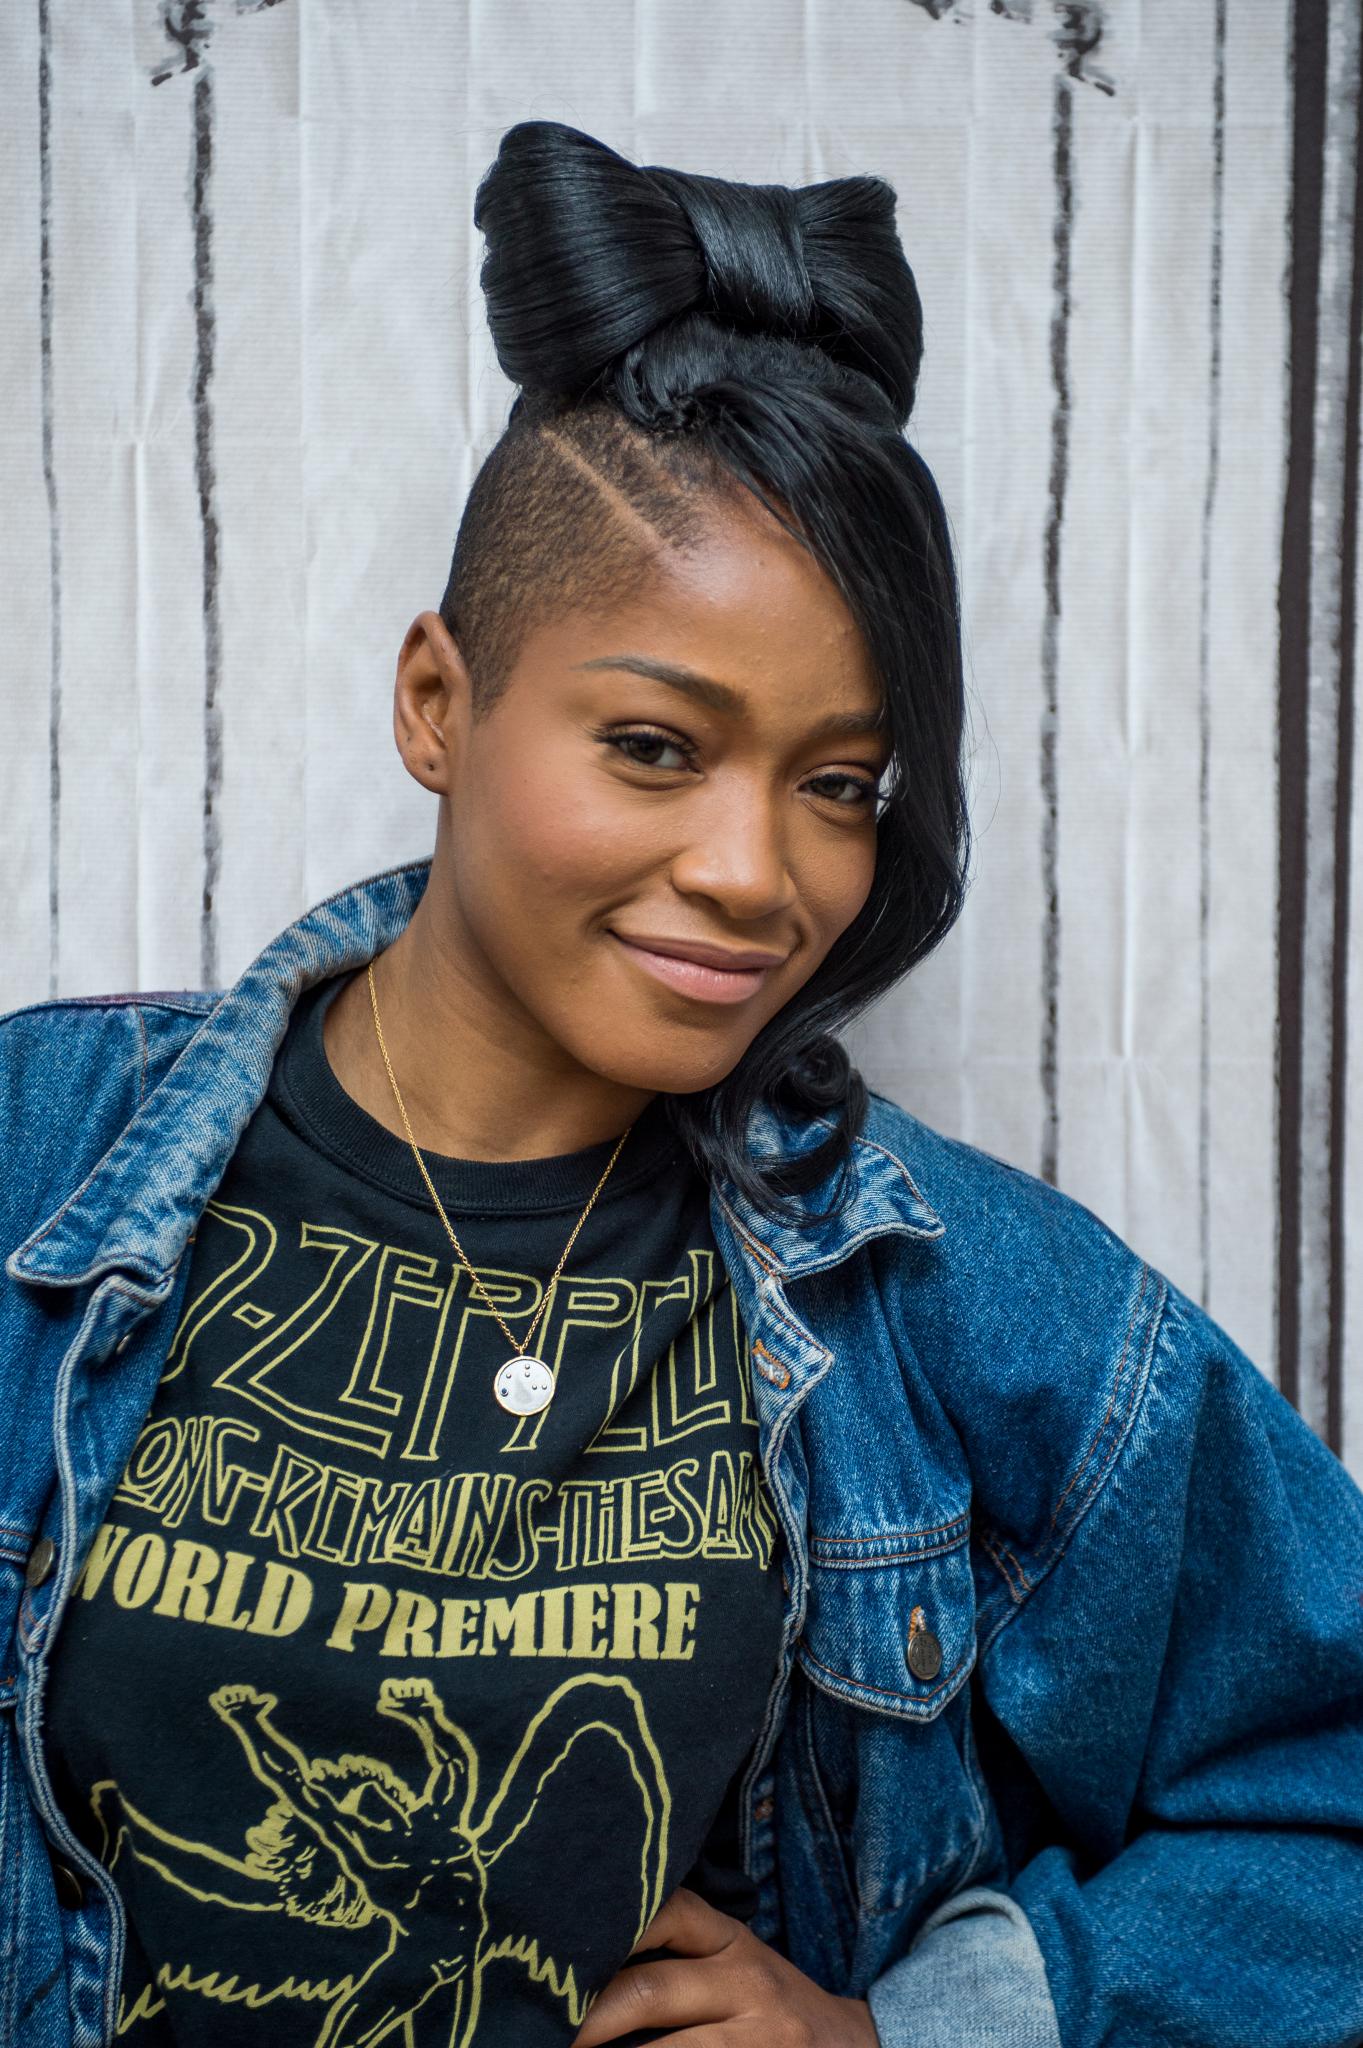 Keke Palmer Reveals Why She Shaved Her Head in 'Hair Stories' Series
